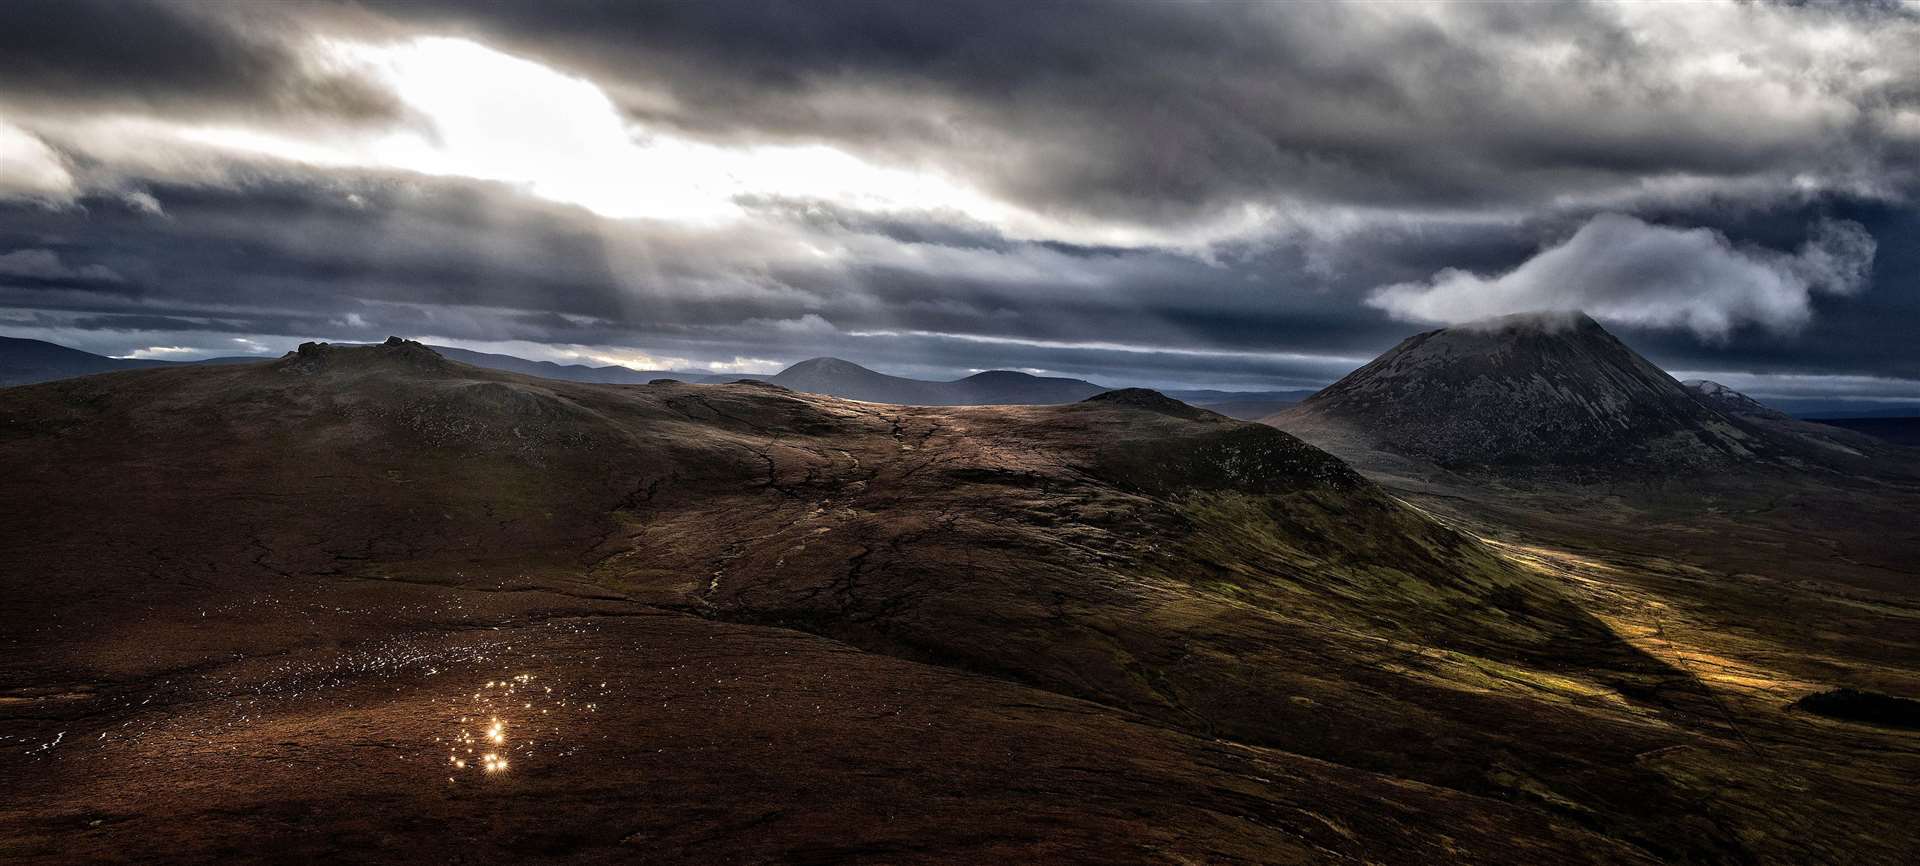 Morven by Gavin Macqueen, one of the images he discussed during his visit to Thurso Camera Club.